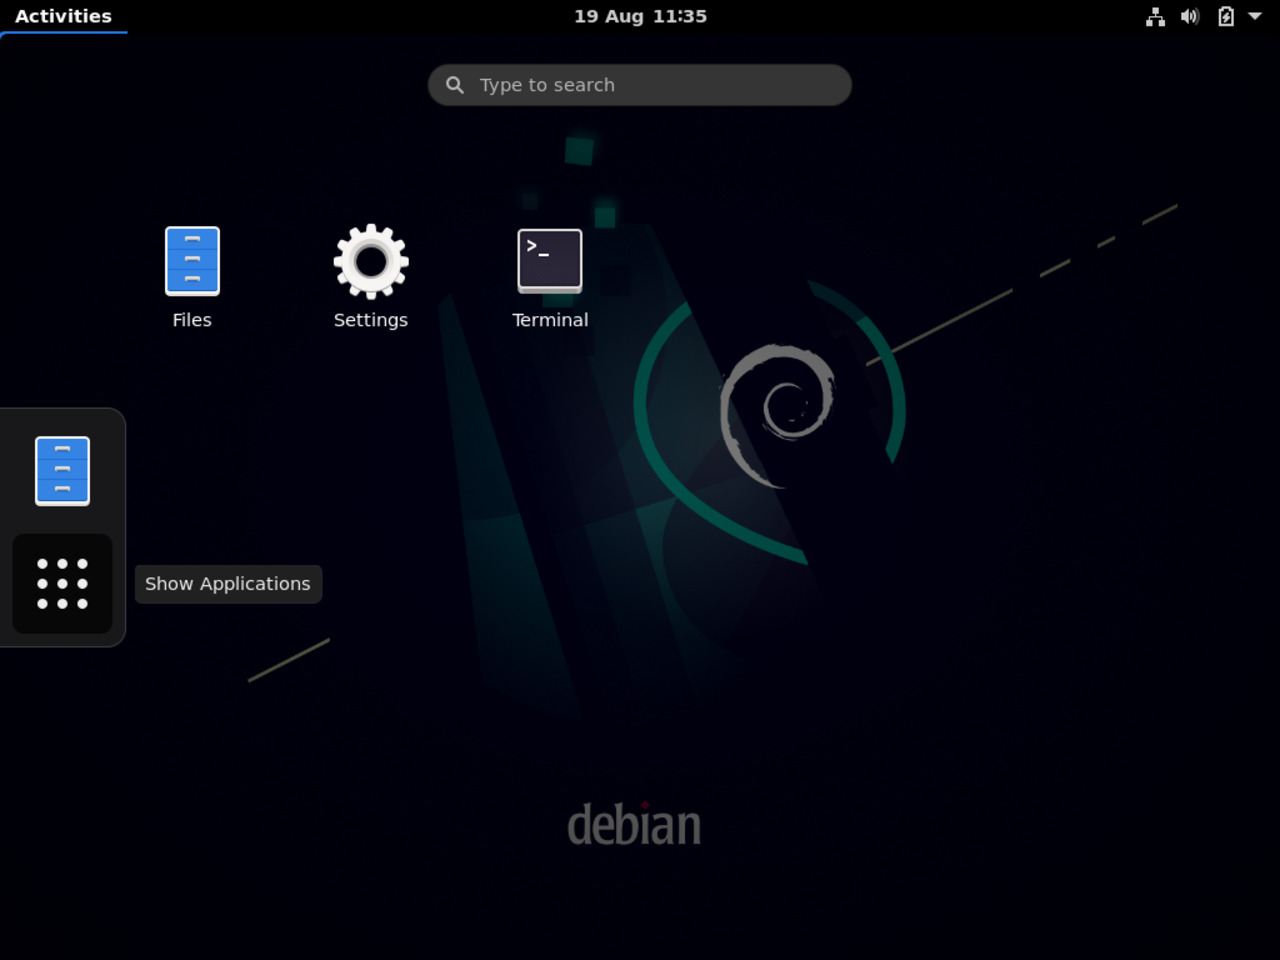 My first Linux laptop - The installation of Debian with a minimal Gnome graphical environment is ready for use